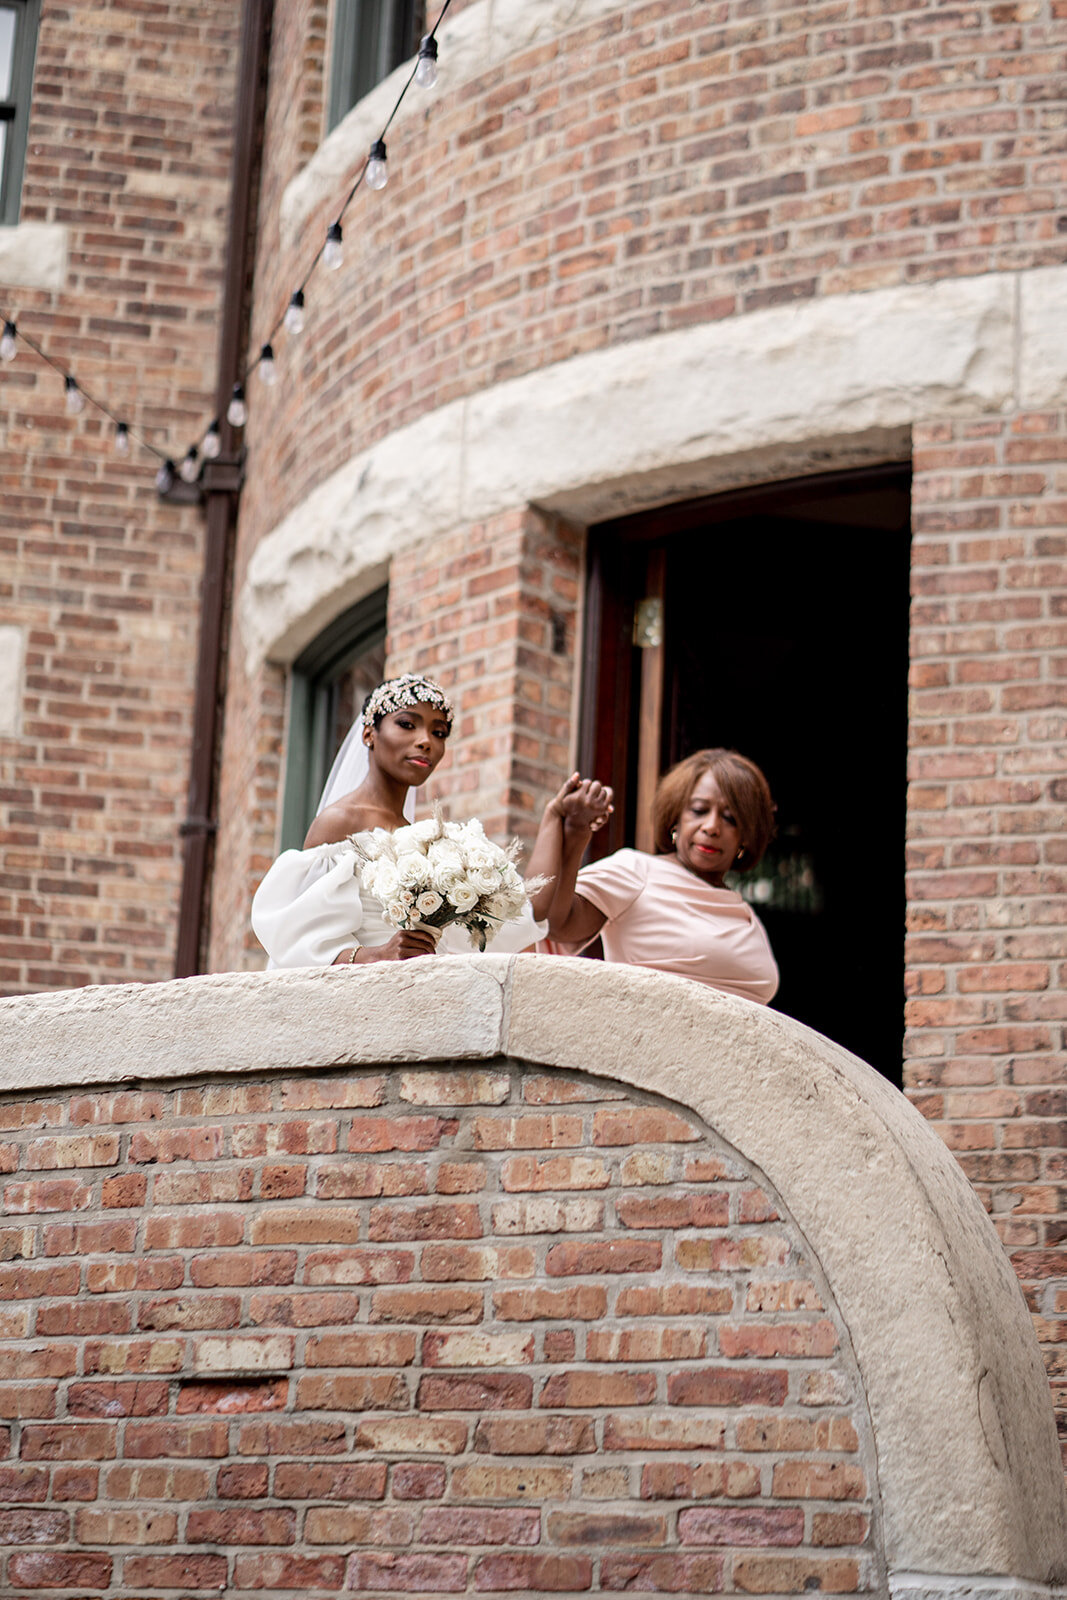 Stylish Micro Wedding at the Glessner House captured by M28 Photography | CHI thee WED